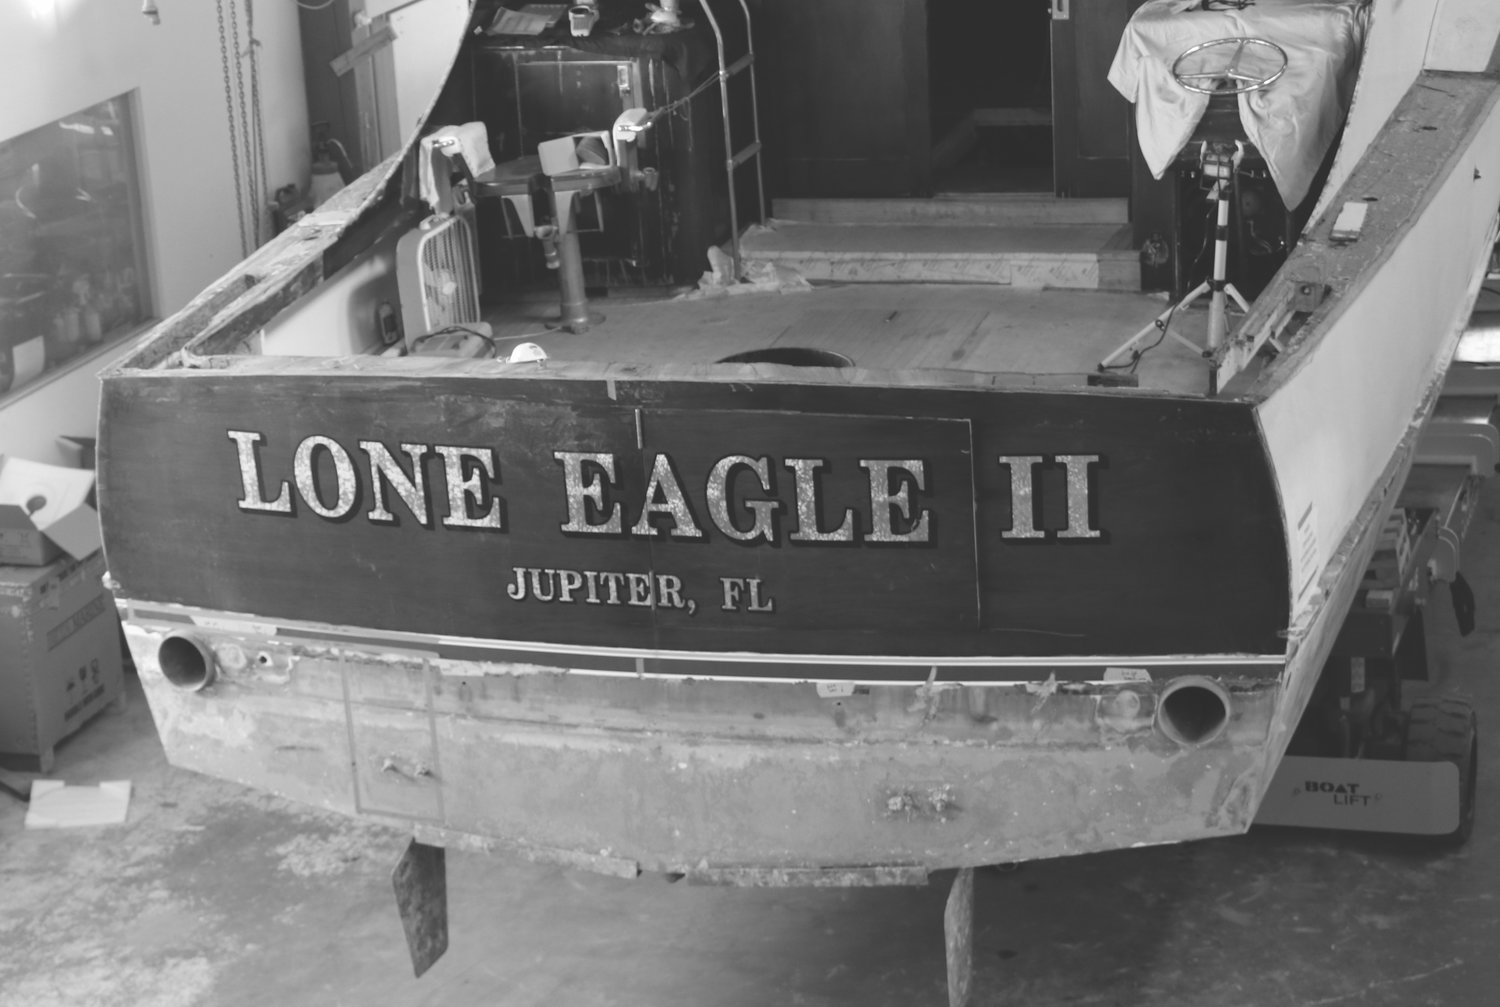 The stern of Lone Eagle II under renovations in SEA Marine Navy building.